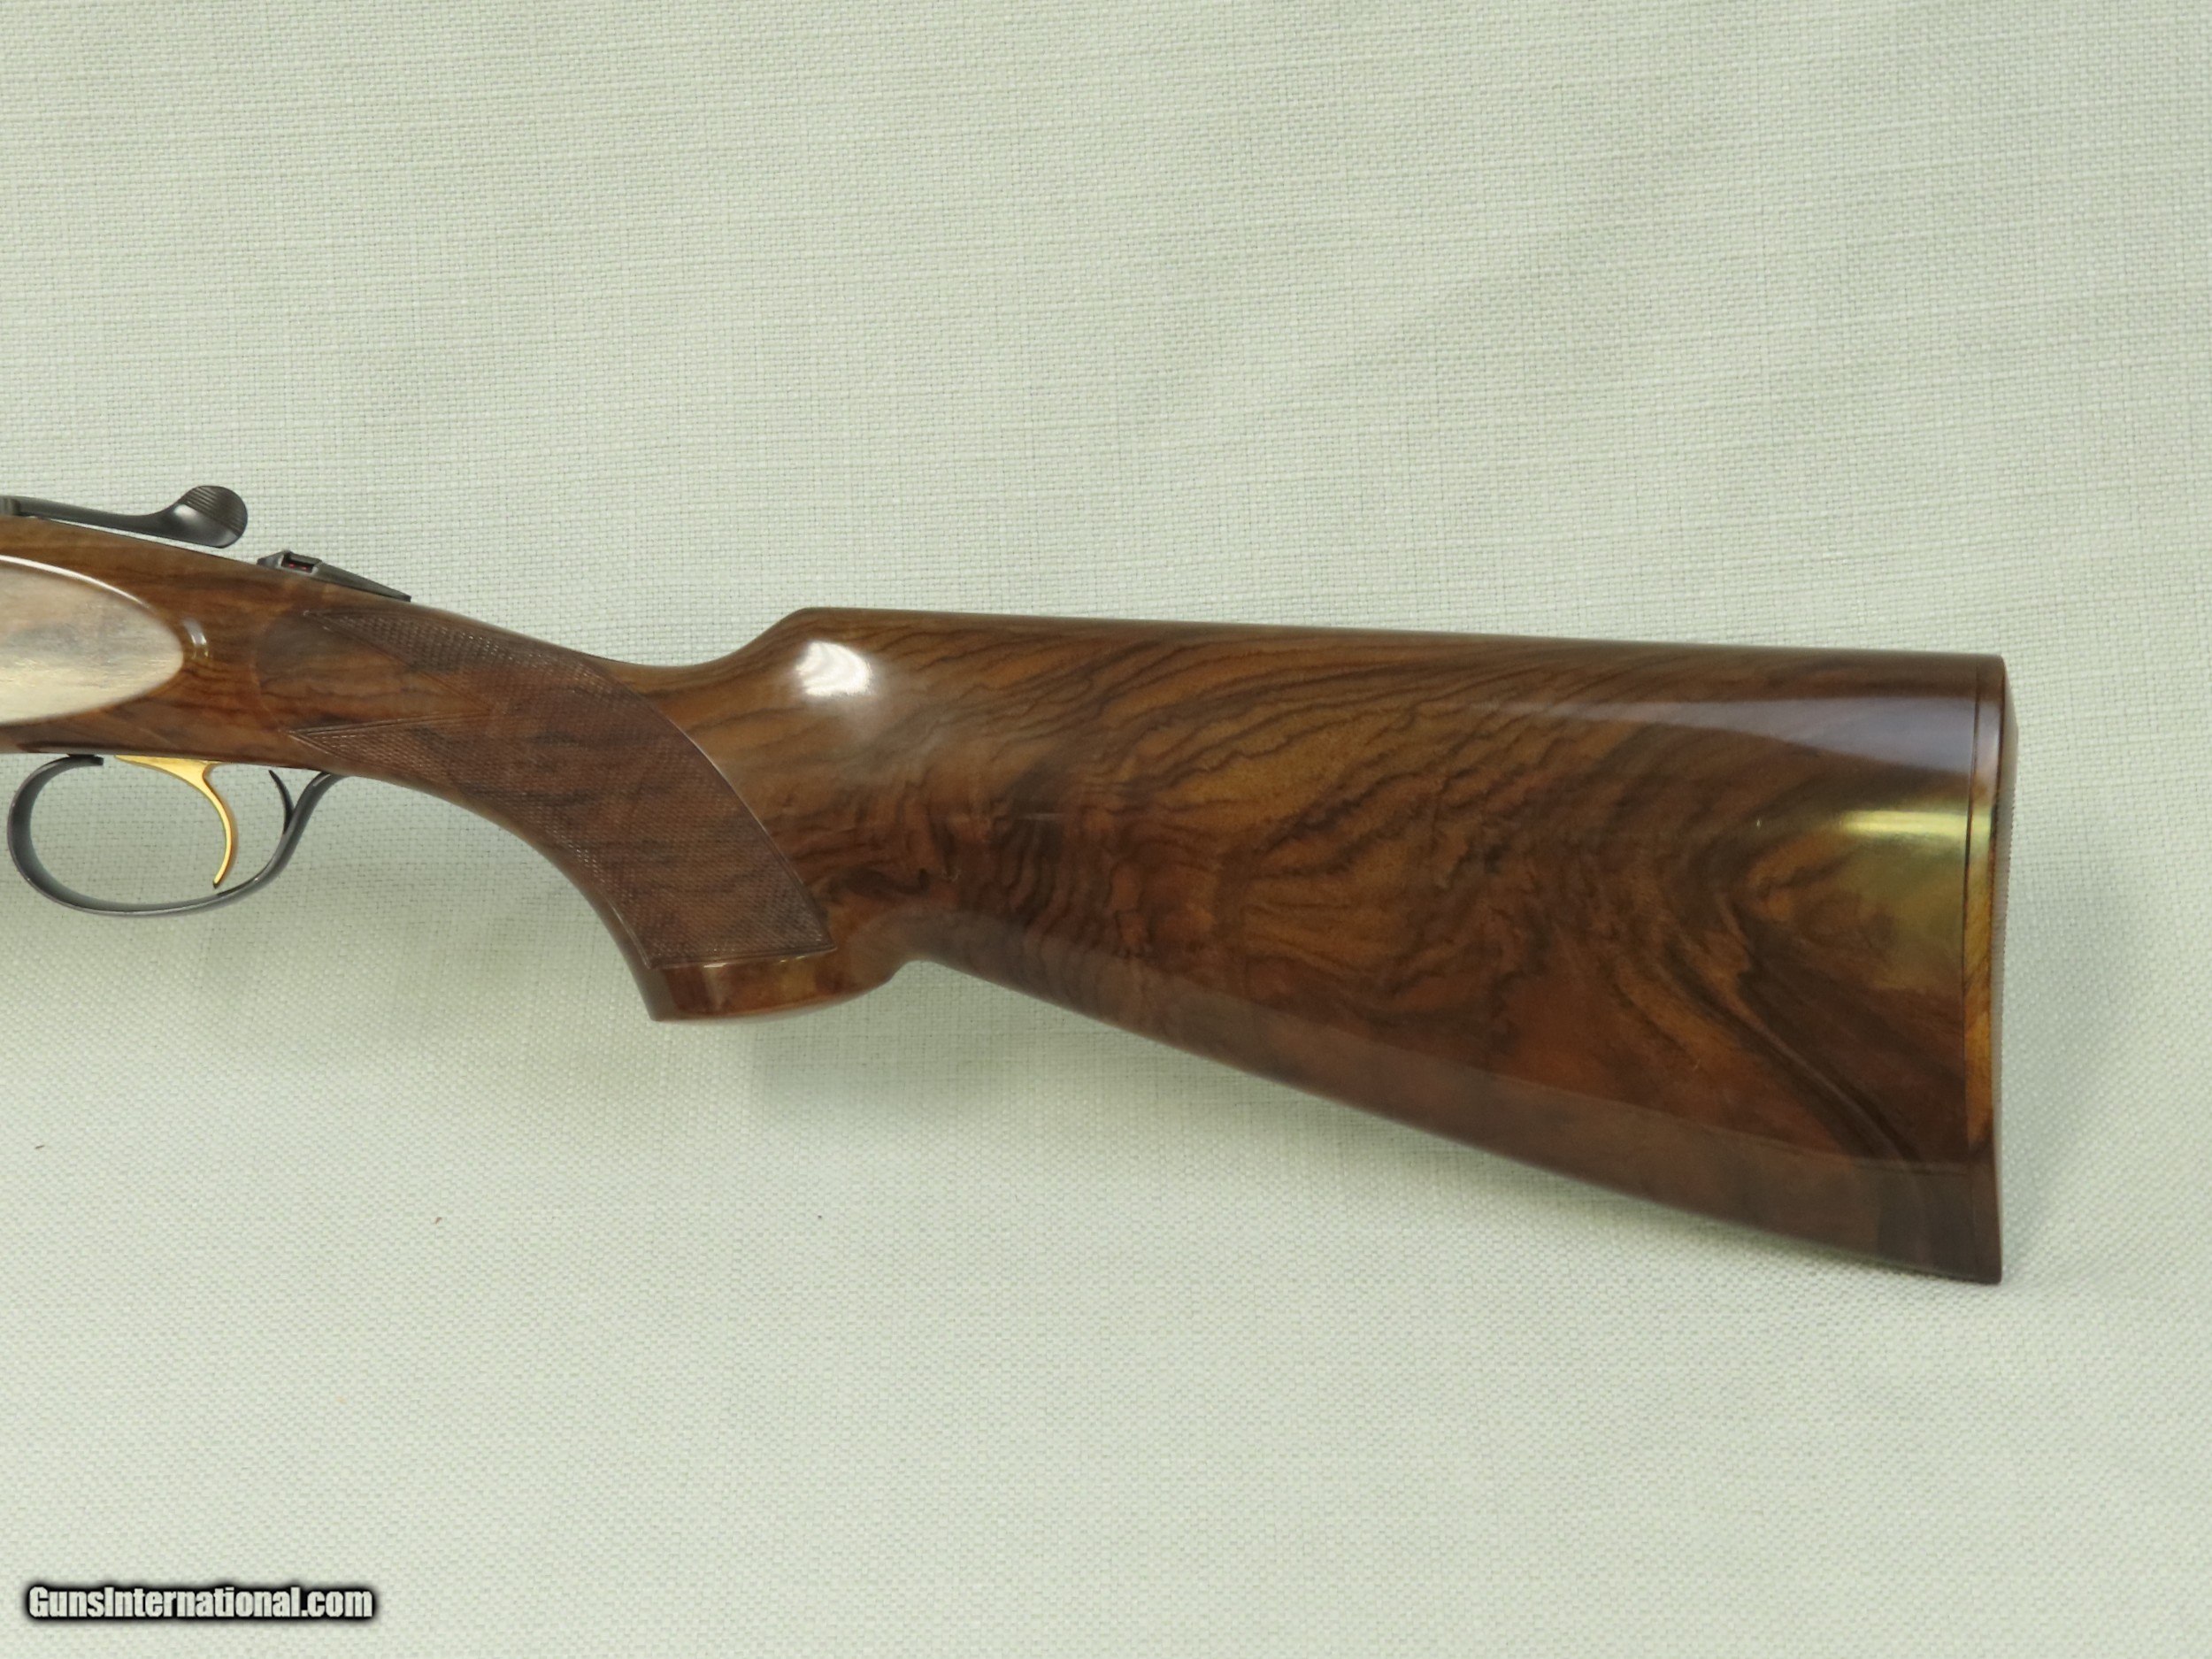 1985 Beretta Model S686 Special The Ruffed Grouse Society 25th 